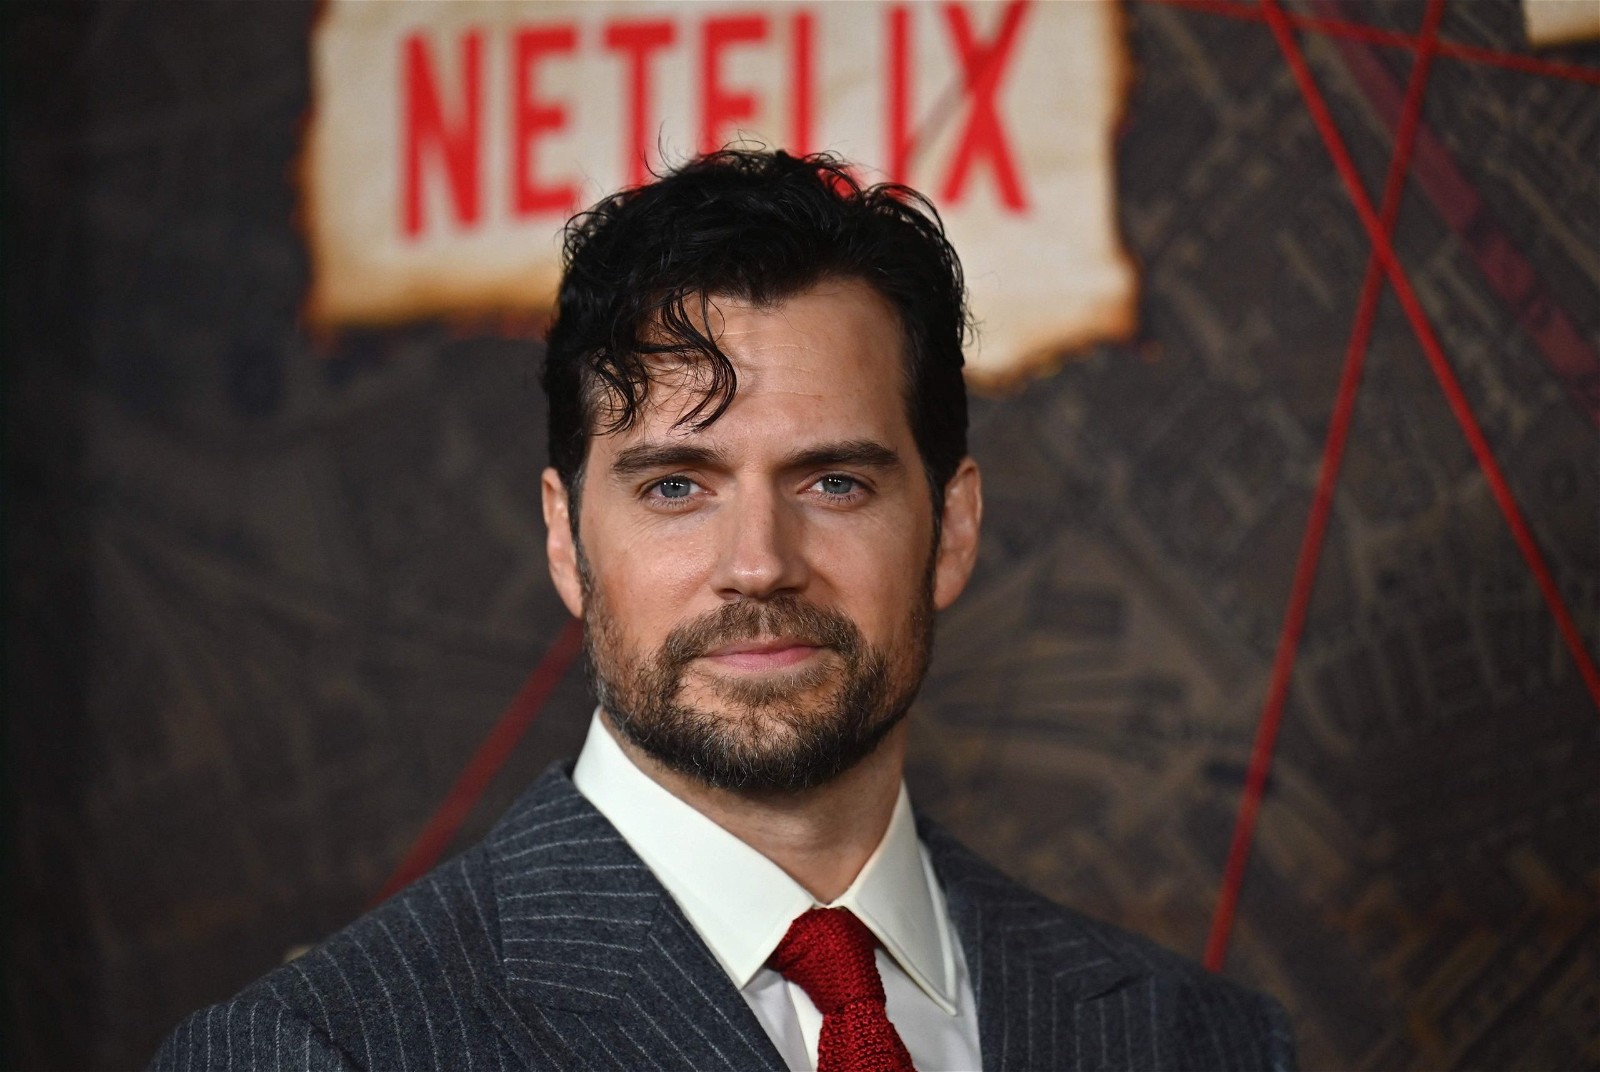 Henry Cavill at the premiere of Enola Holmes.